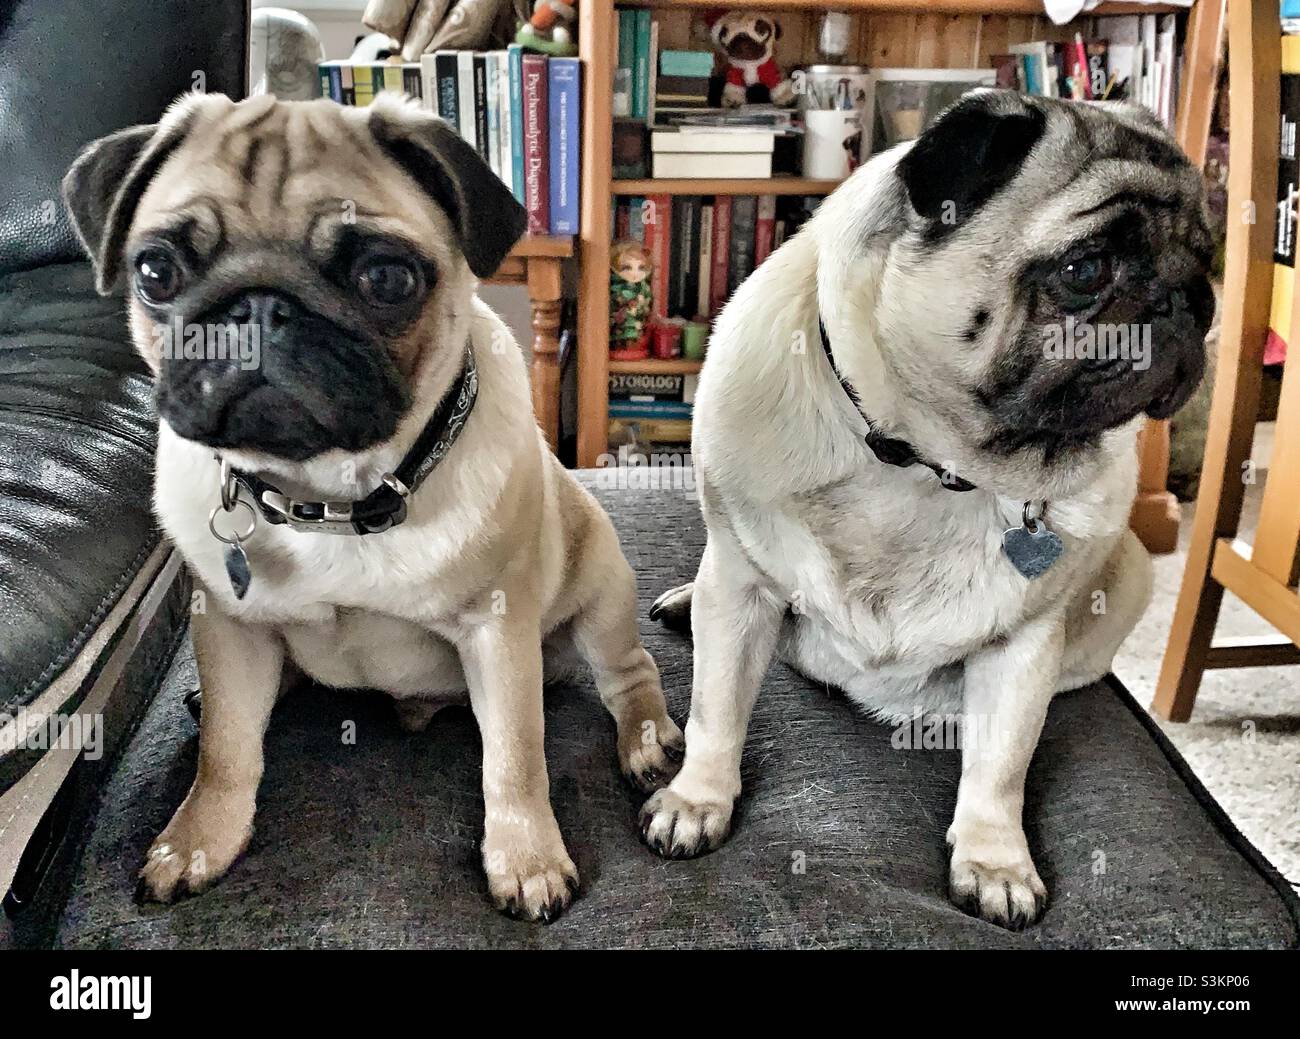 Two pugs sitting together Stock Photo